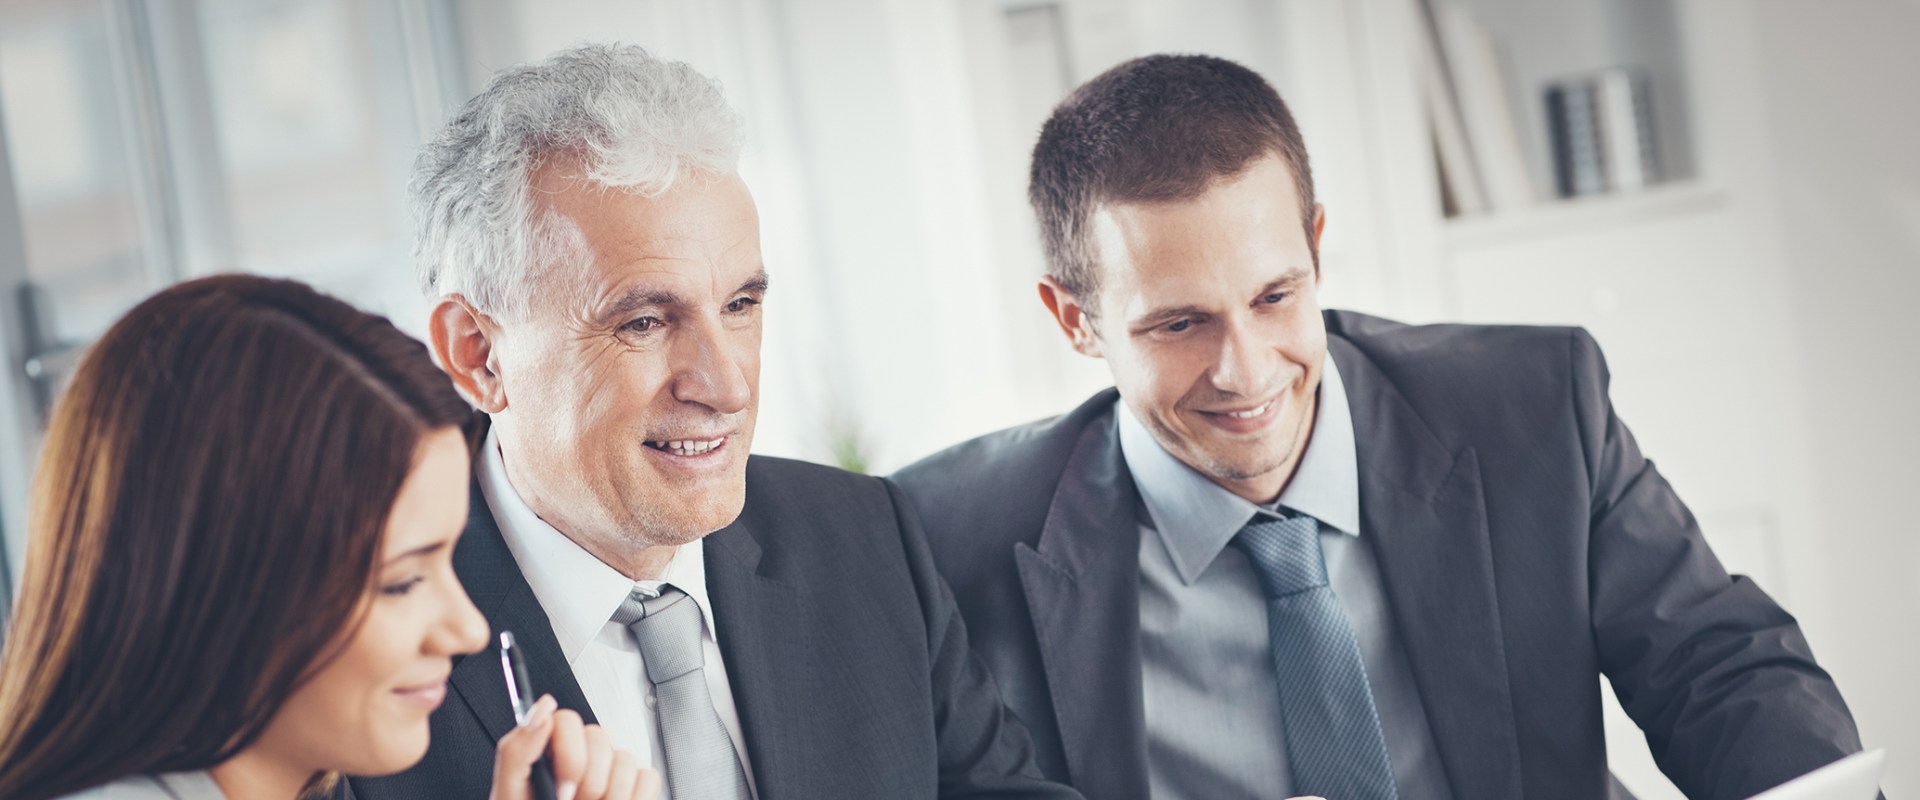 The Essential Qualities of a Great Business Mentor